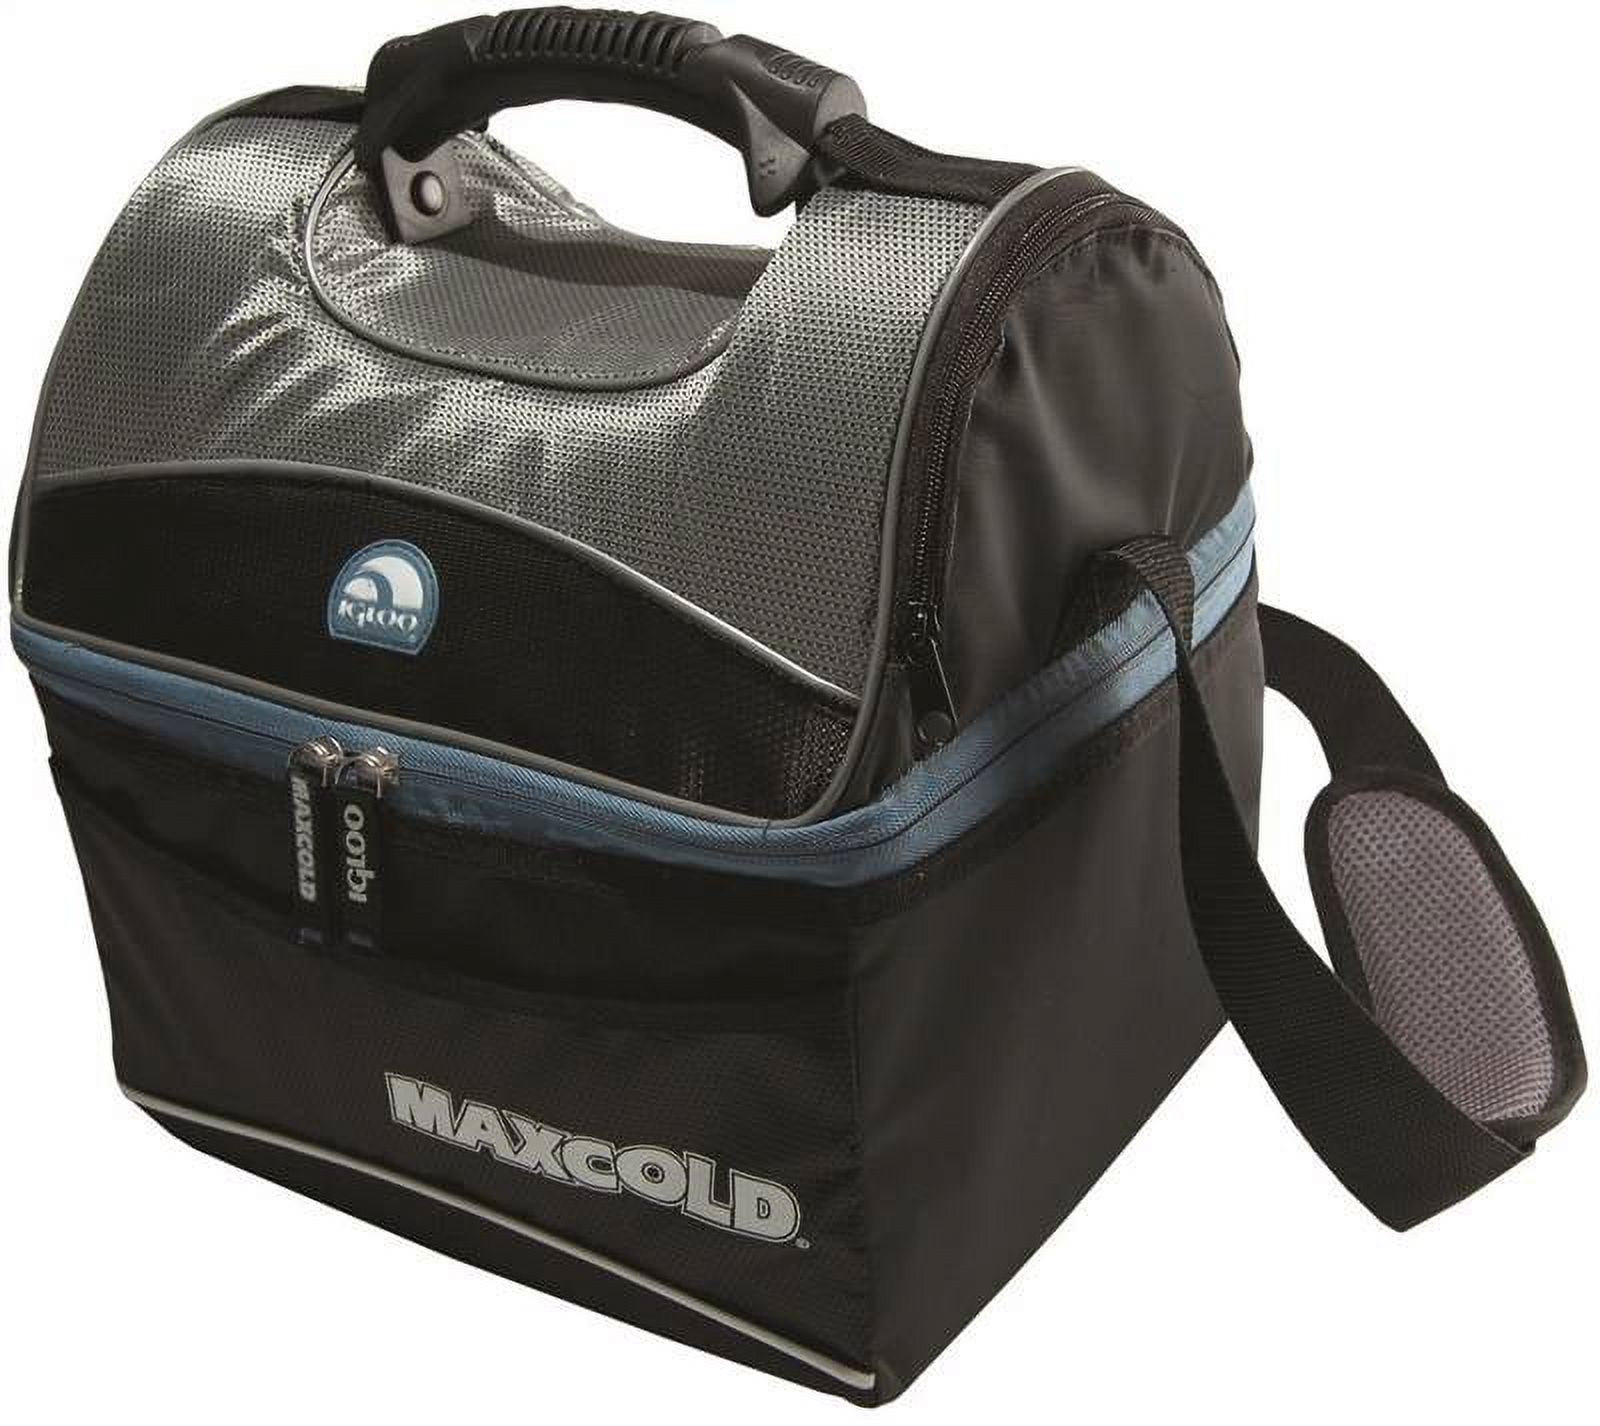 Igloo MaxCold Gripper 16-Qt Lunch Box, Black - image 1 of 4